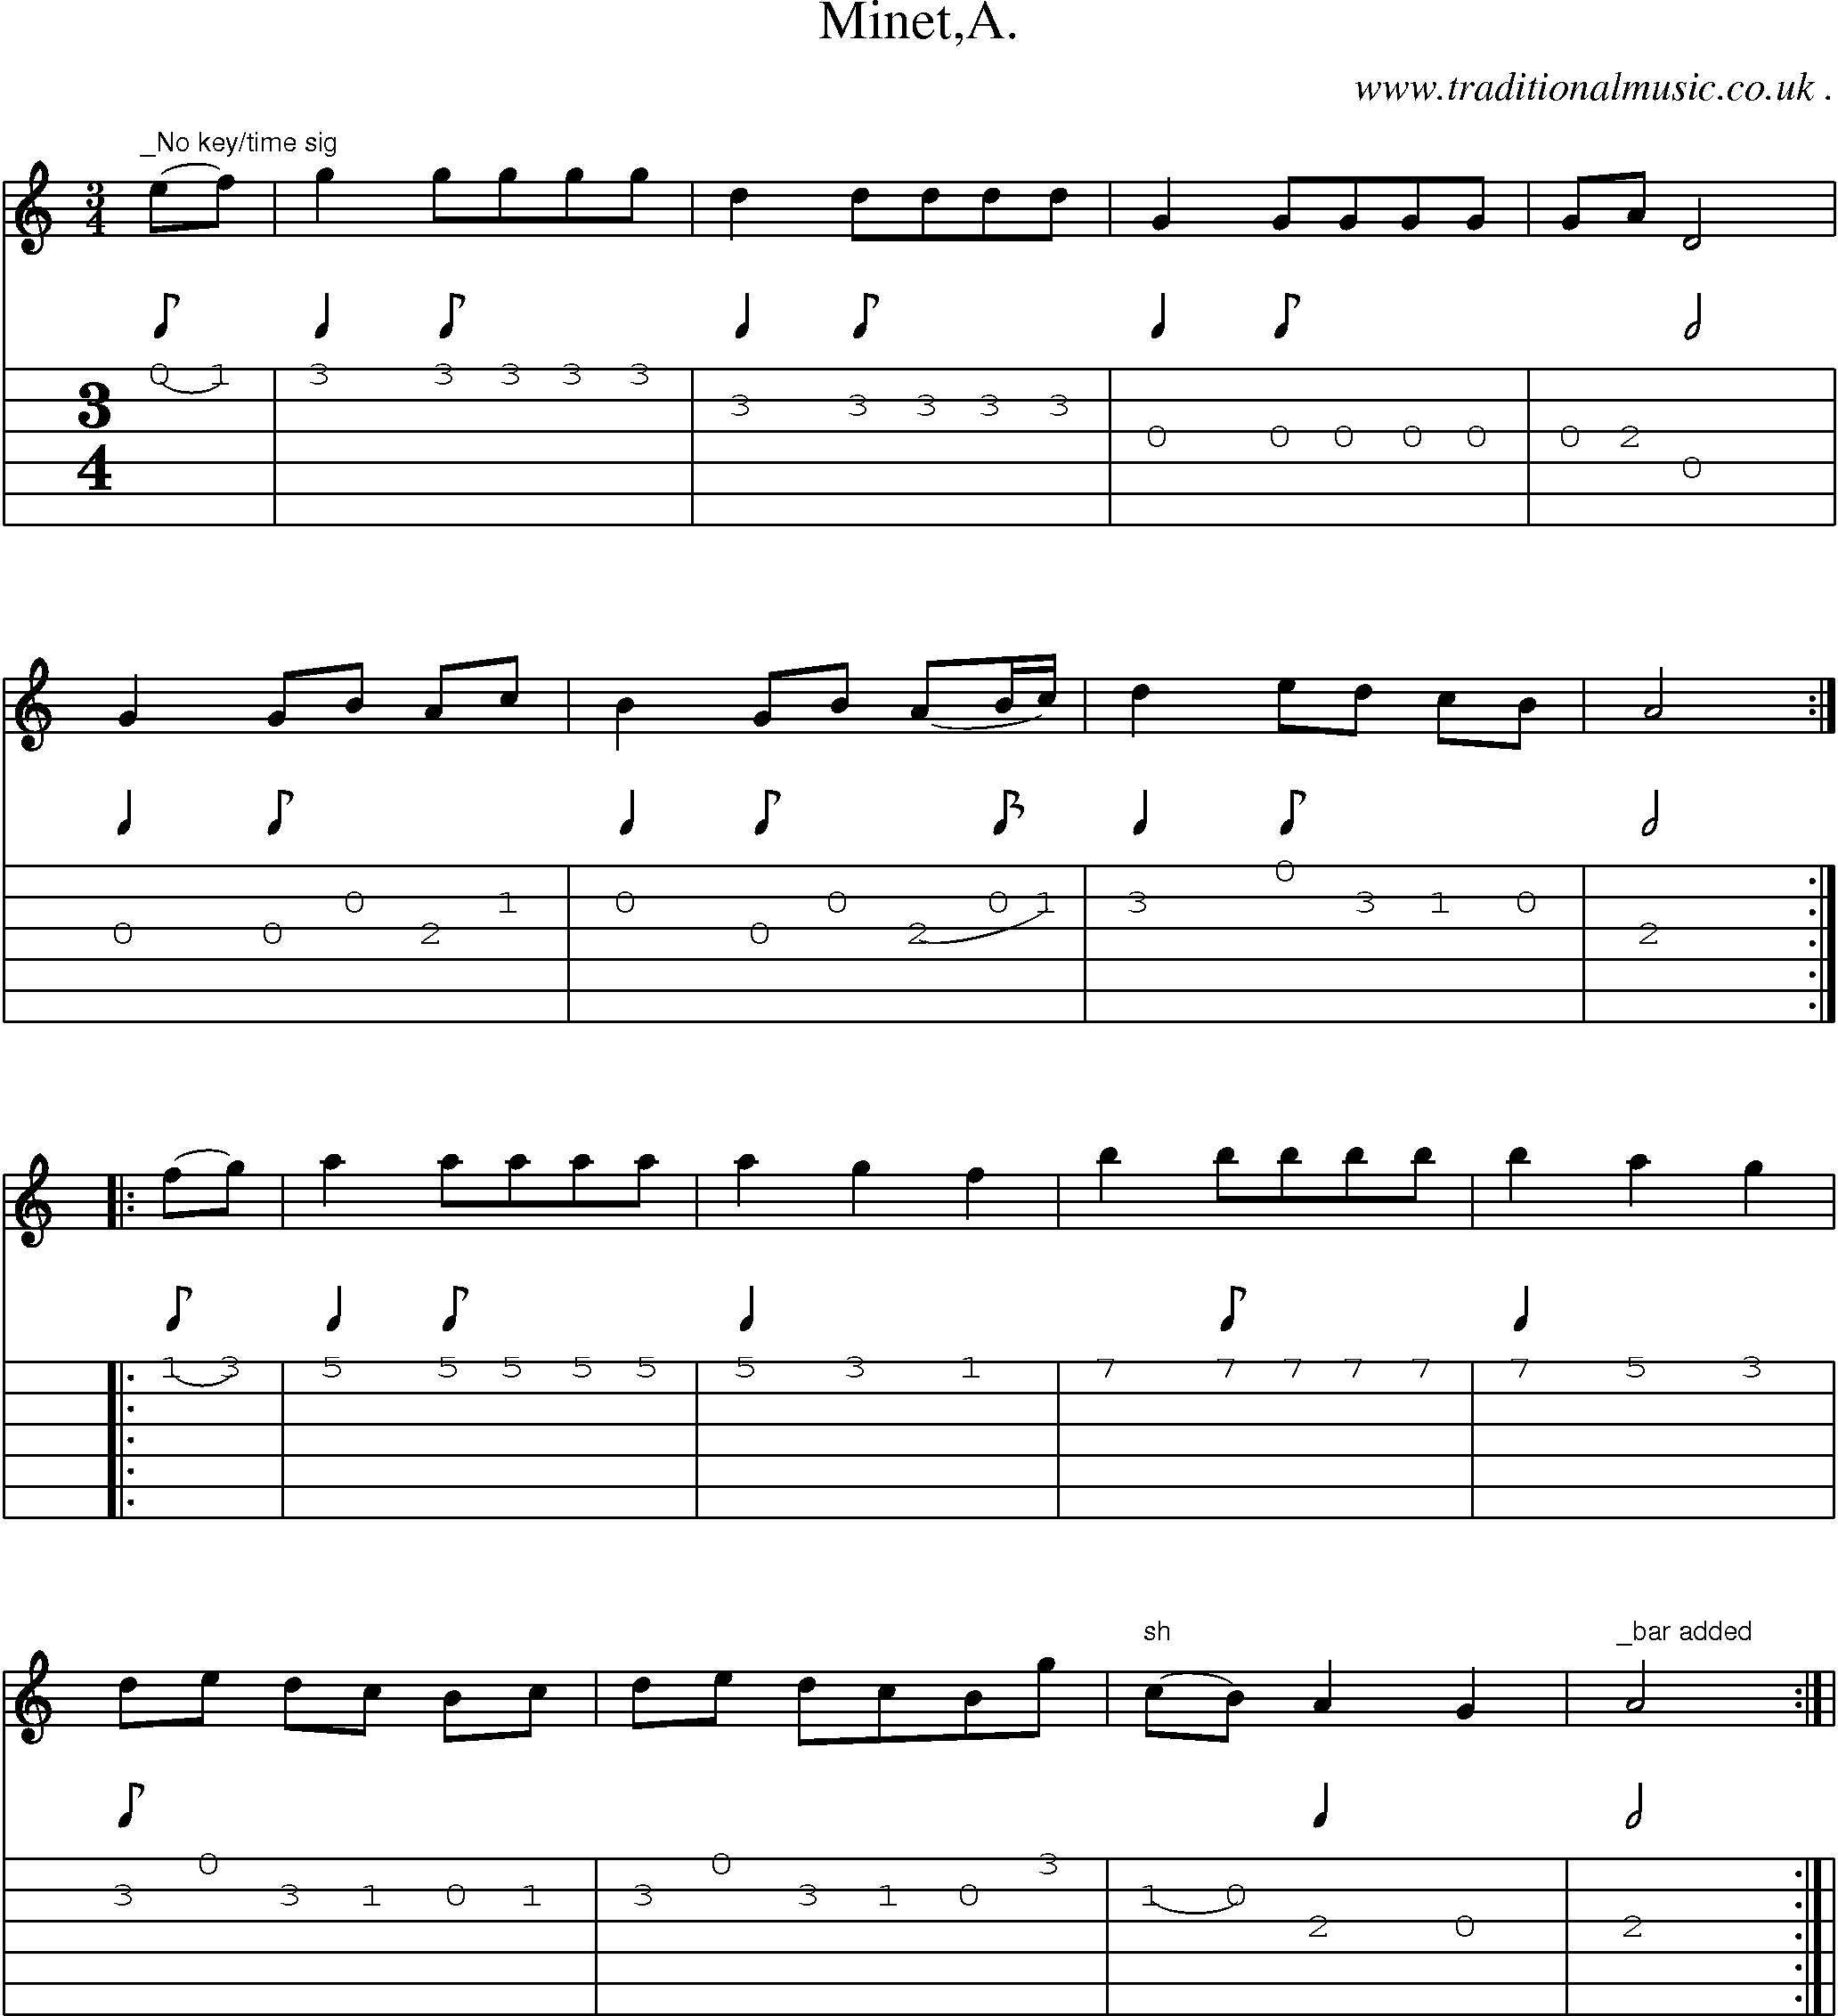 Sheet-Music and Guitar Tabs for MinetA 